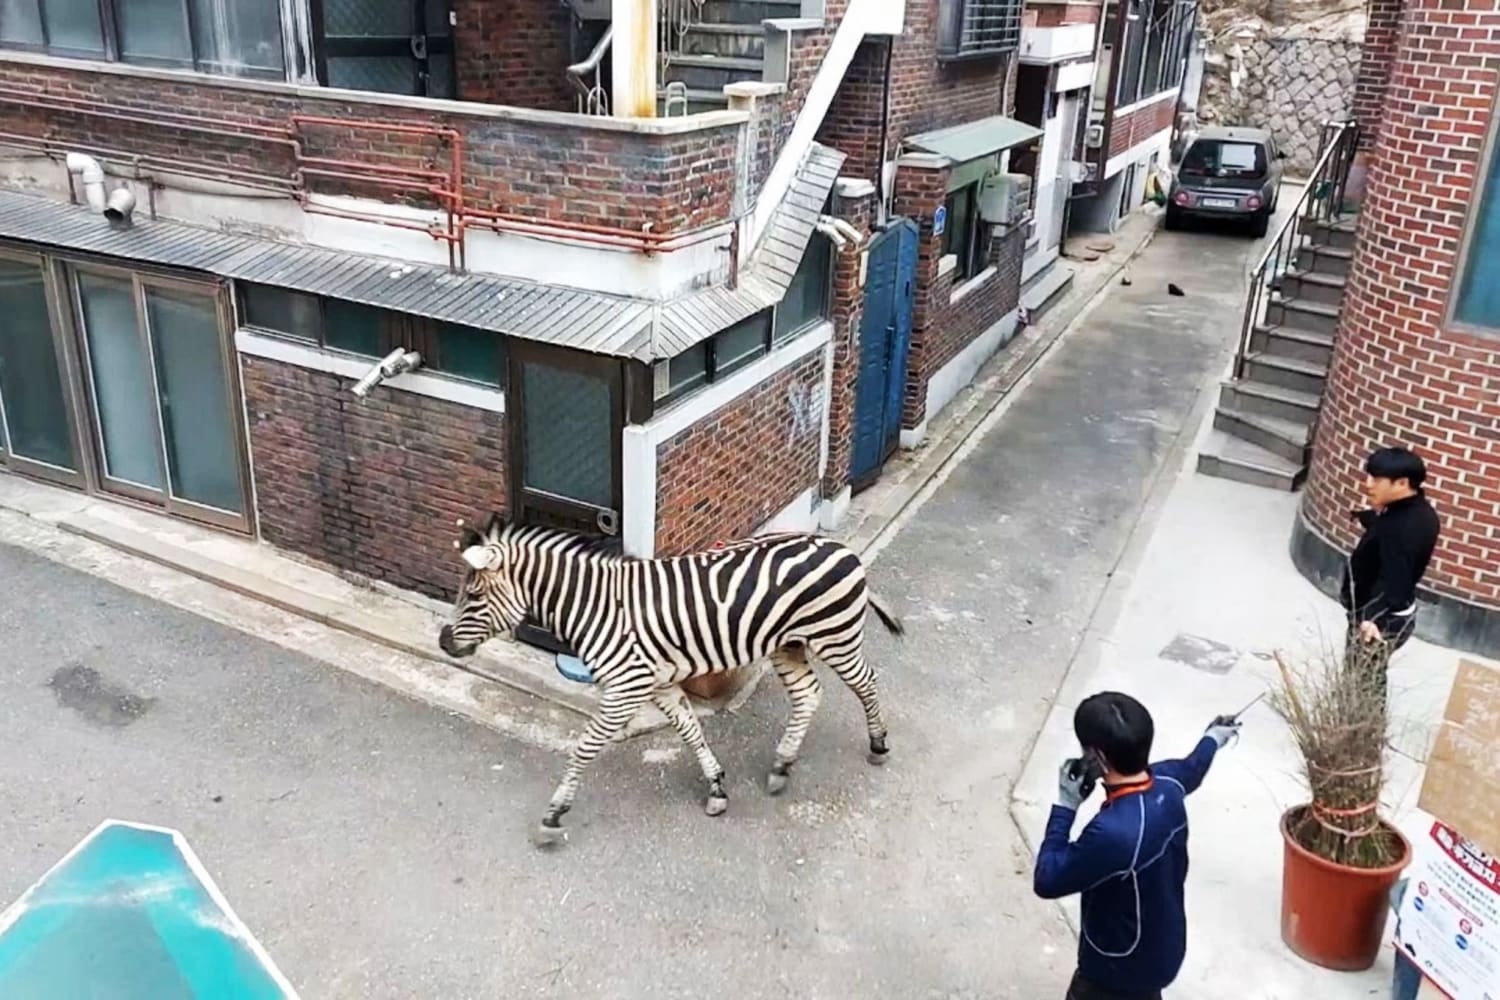 Lonely zebra's zoo escape brings drama and delight to South Korea's busy capital